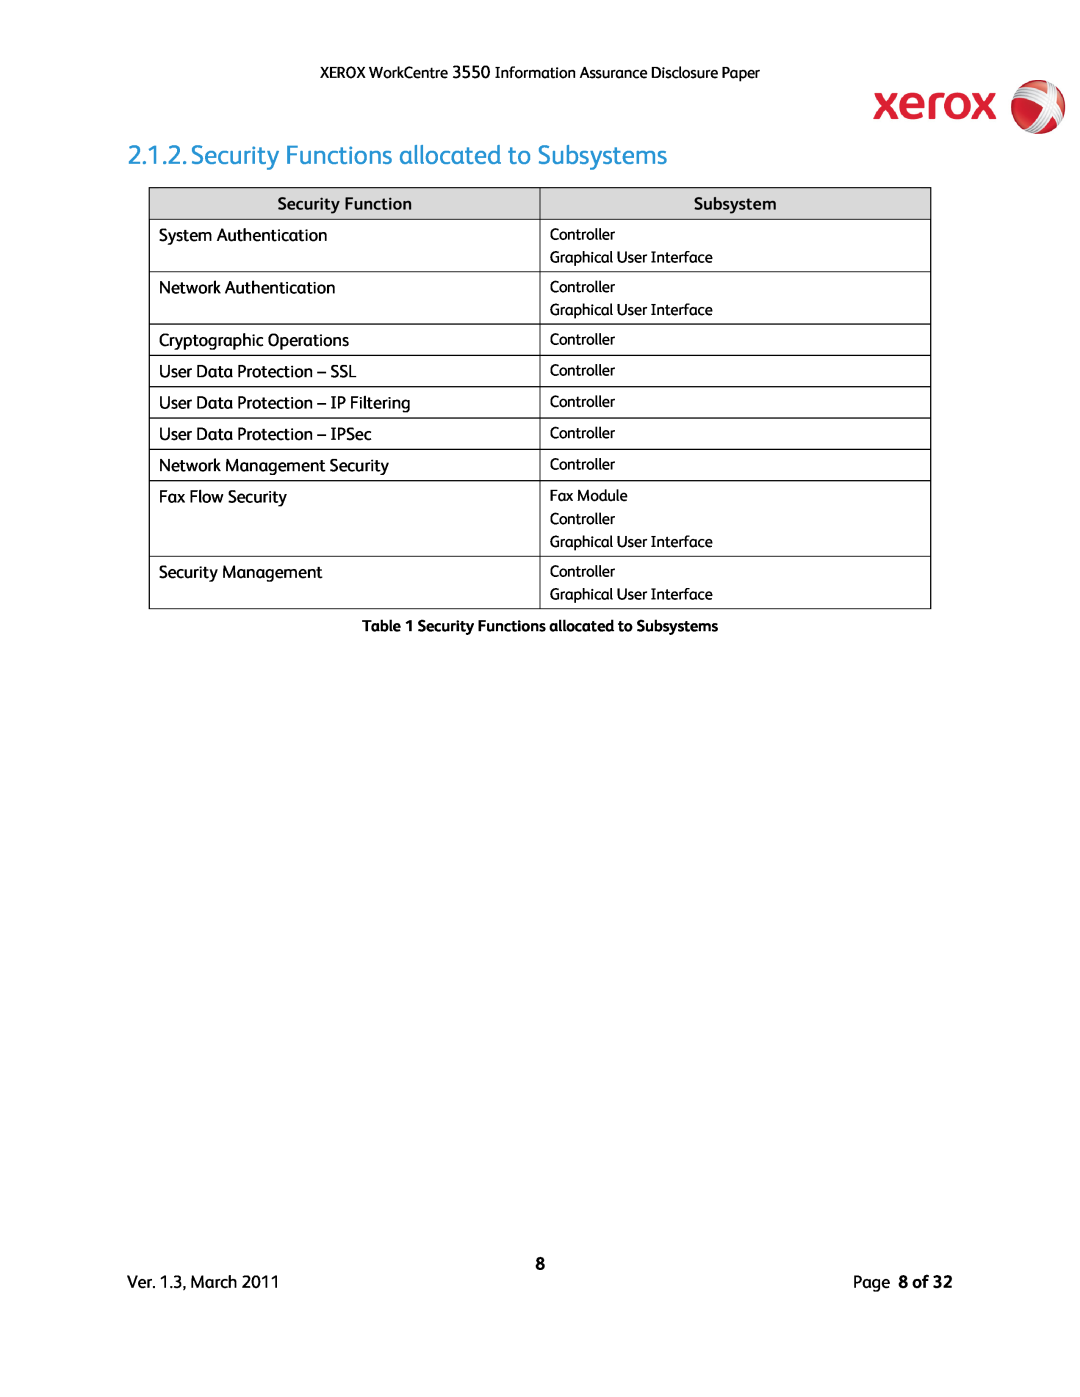 Xerox 3550 manual Security Functions allocated to Subsystems, Ver. 1.3, March, Page 8 of 